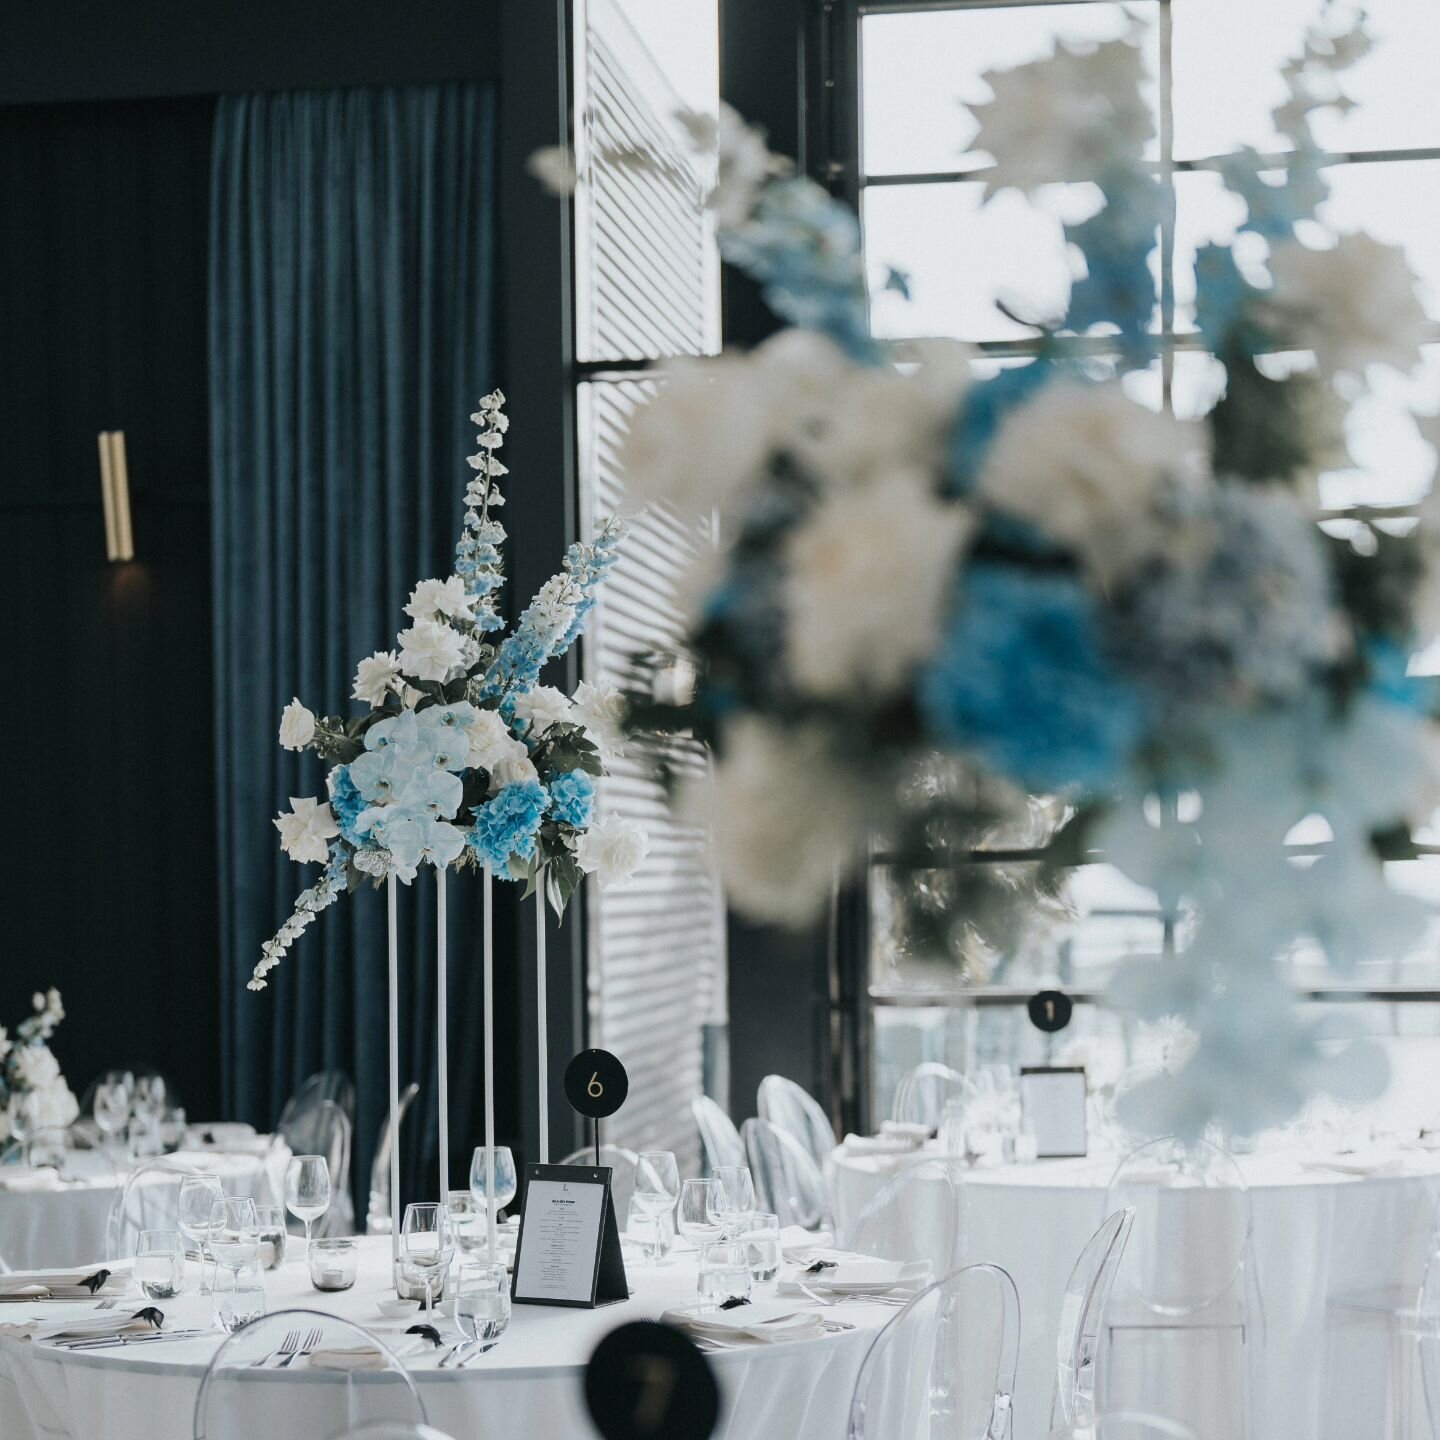 By mixing taller centrepieces with shorter ones, you can create a visually dynamic display without exceeding your budget. This not only adds depth and dimension to your decor but also allows you to stretch your floral budget further, ensuring that yo